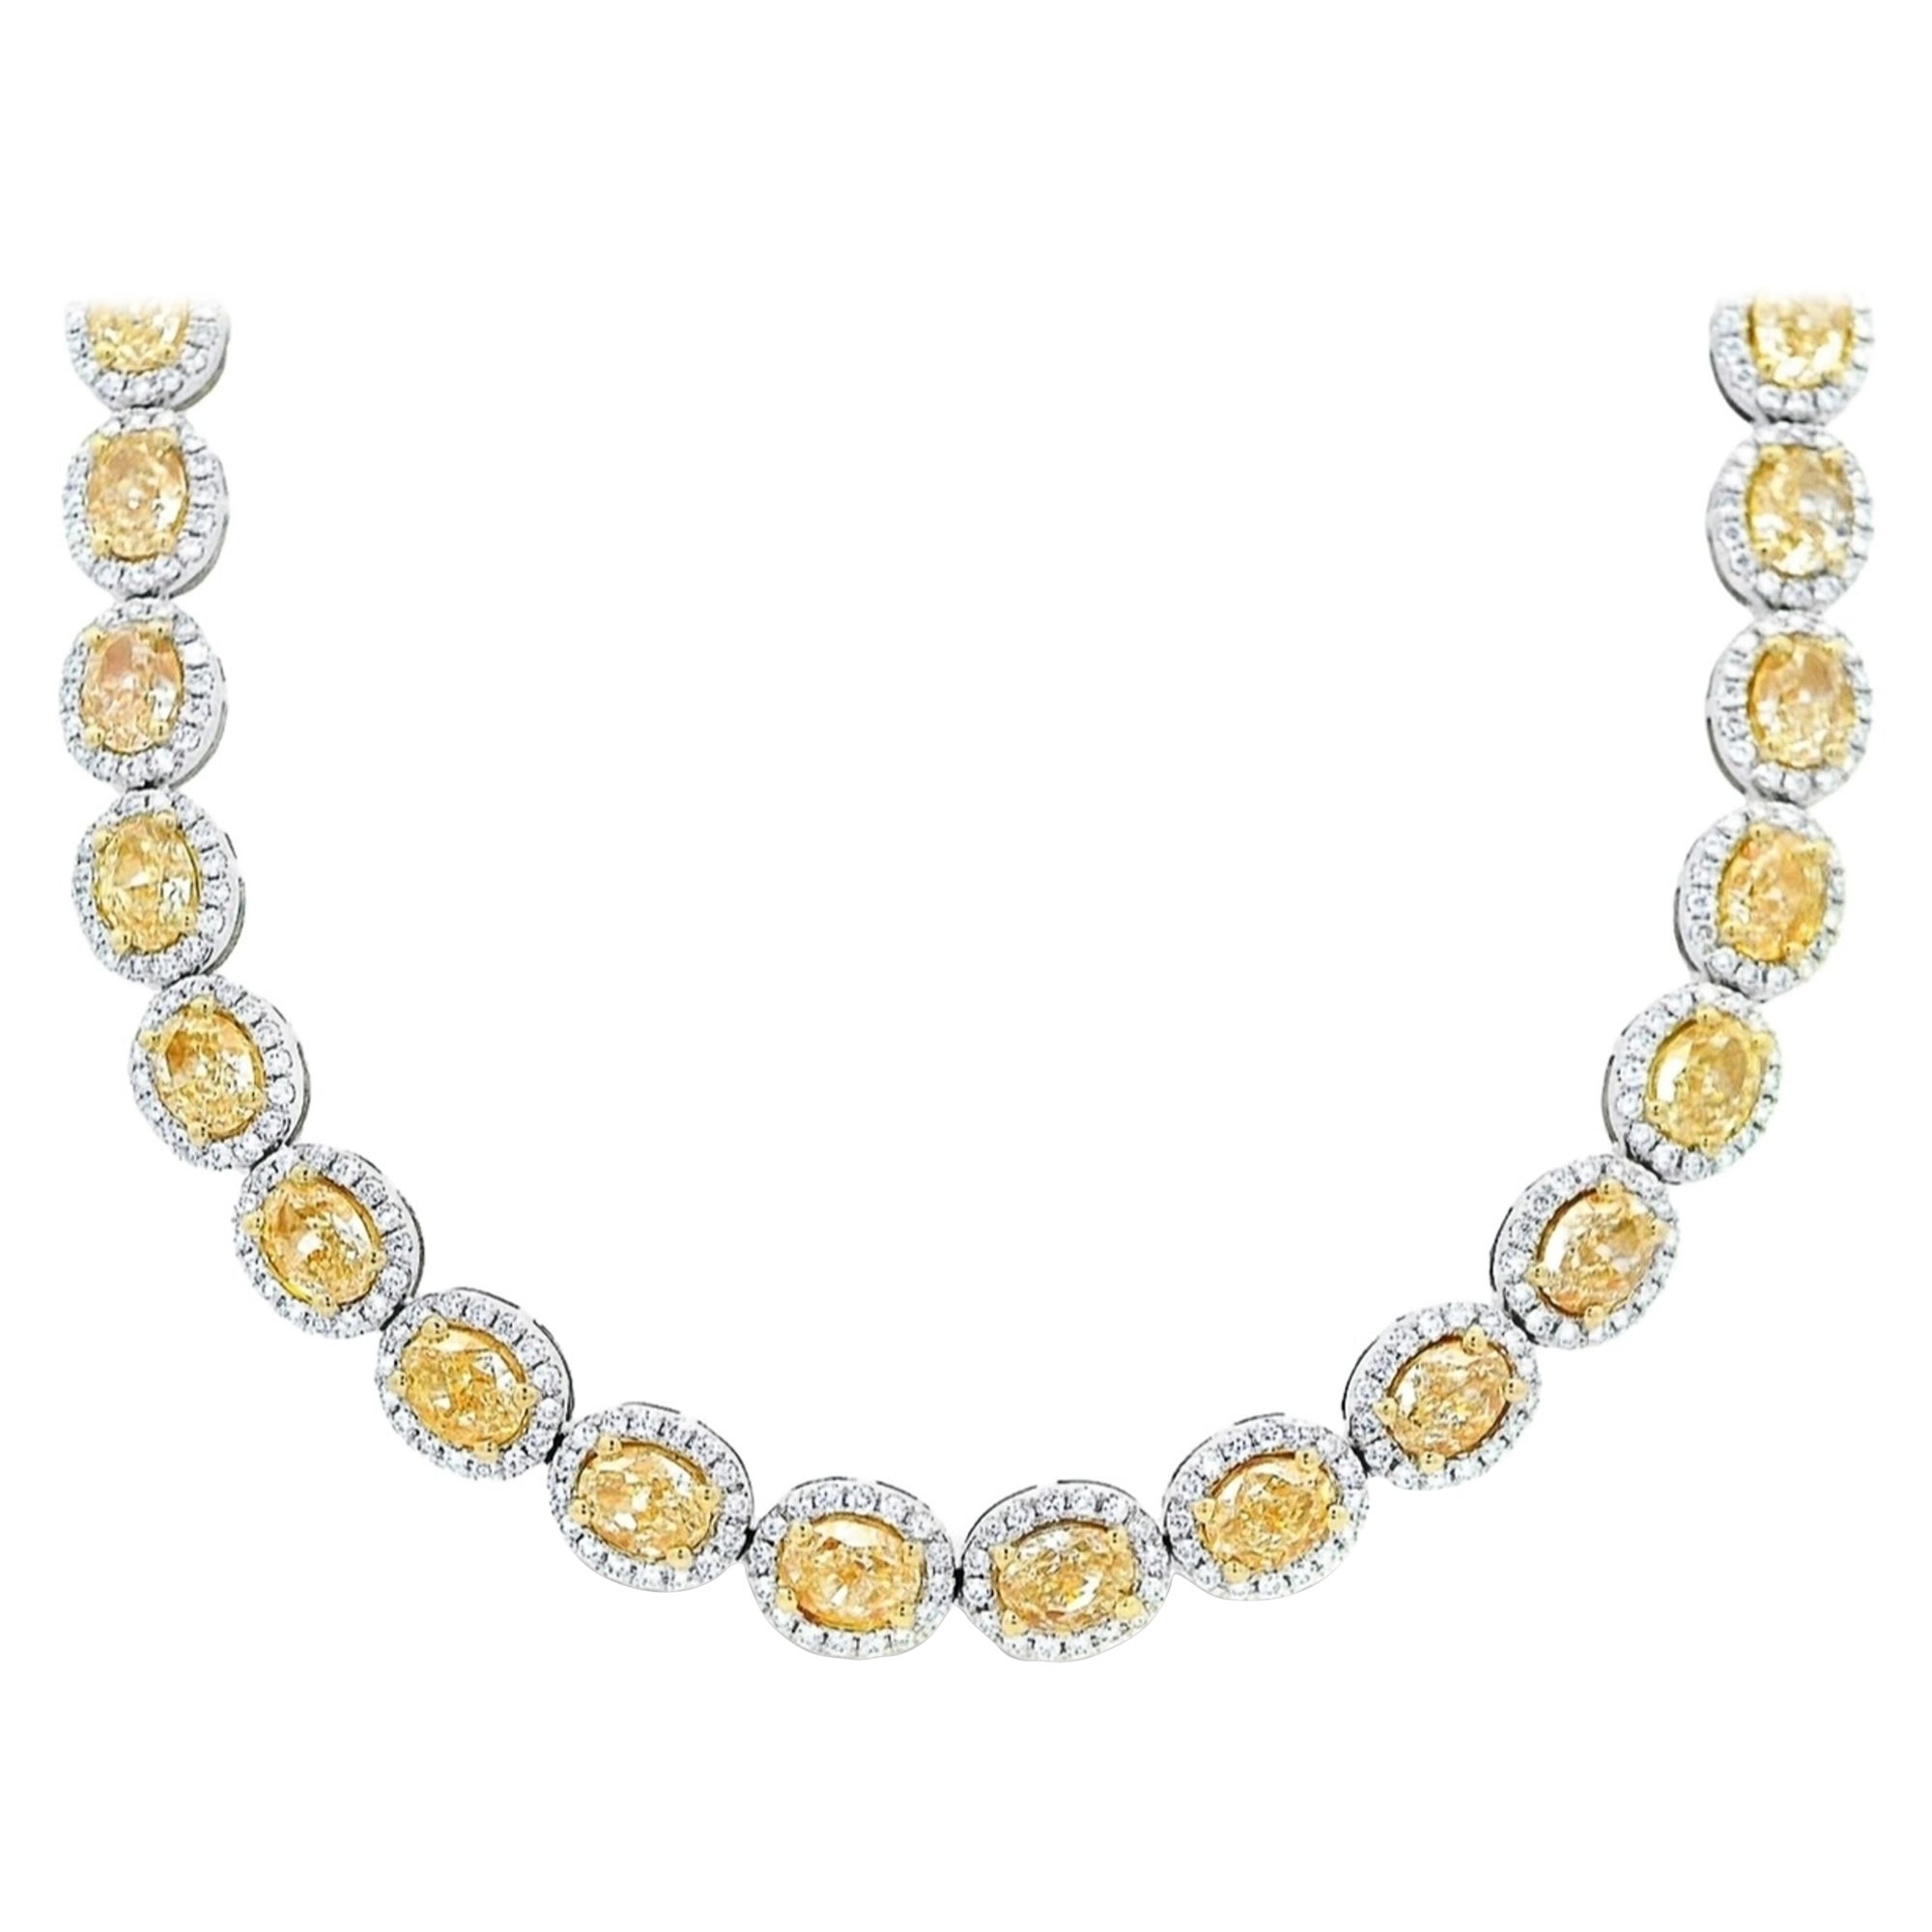 Alexander Beverly Hills 22.37ct Oval Yellow Diamond Necklace with Halo 18k